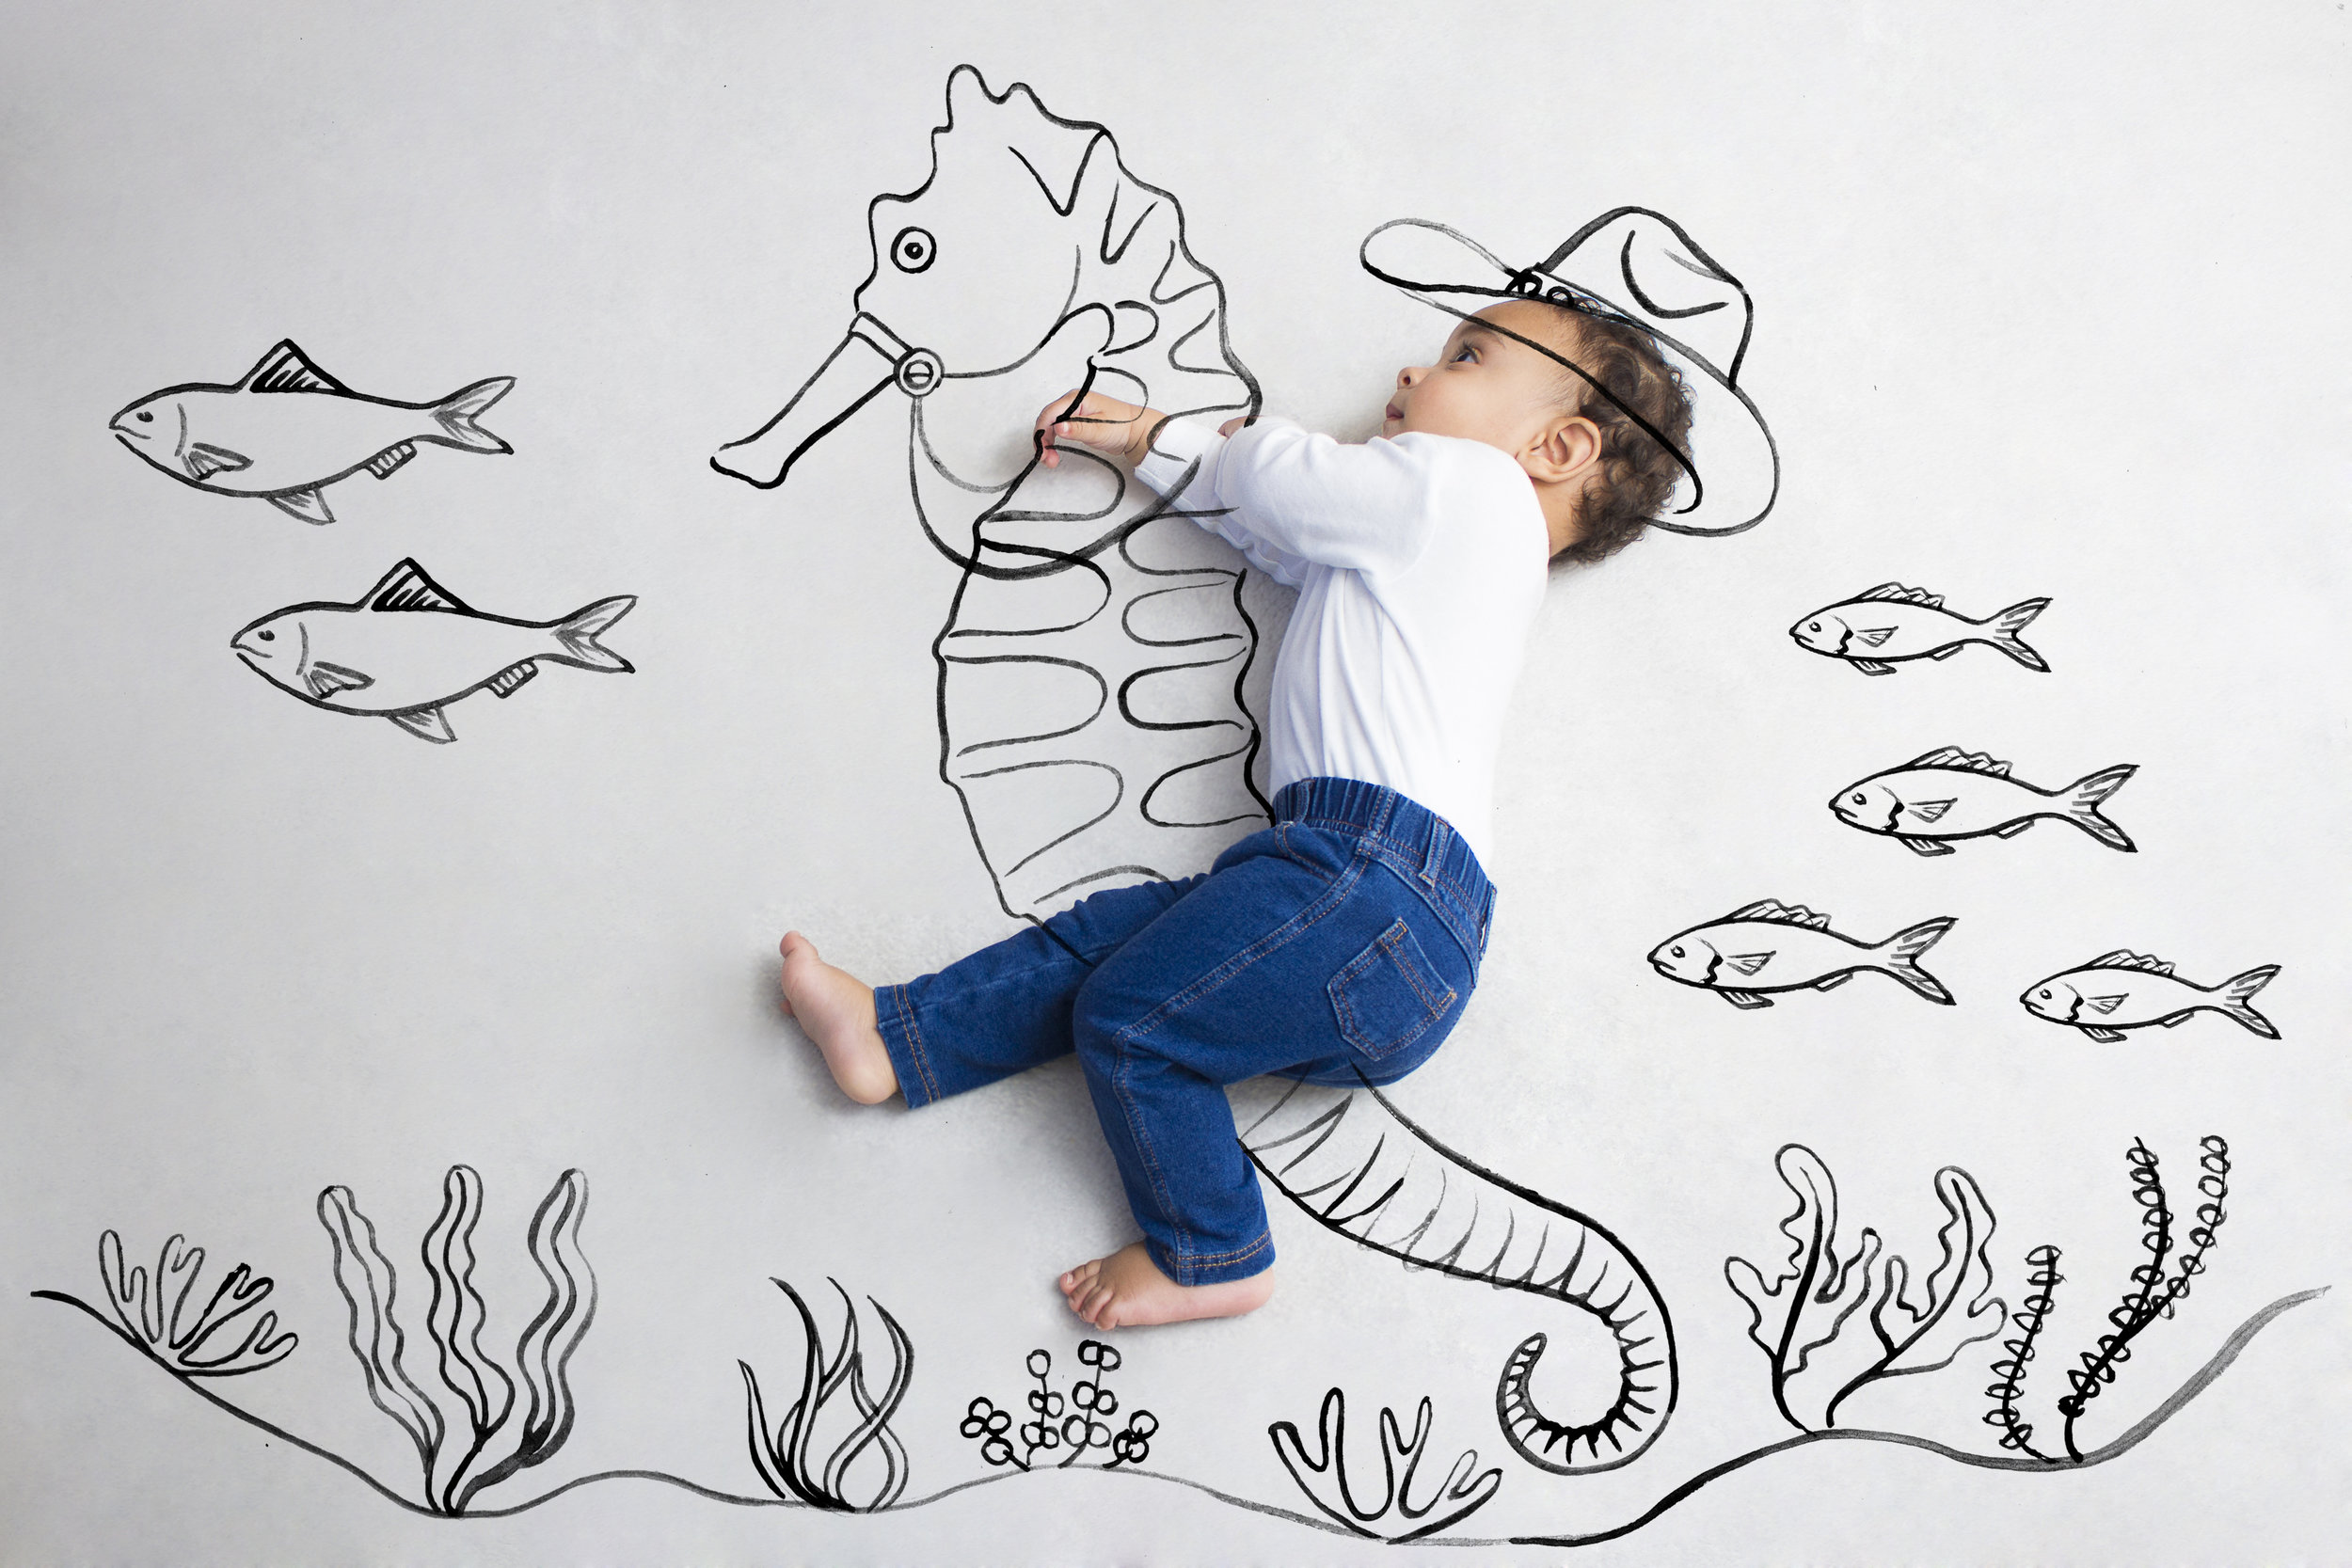 Illustration and photography collaboration for Children by illustrator, Willa Gebbie